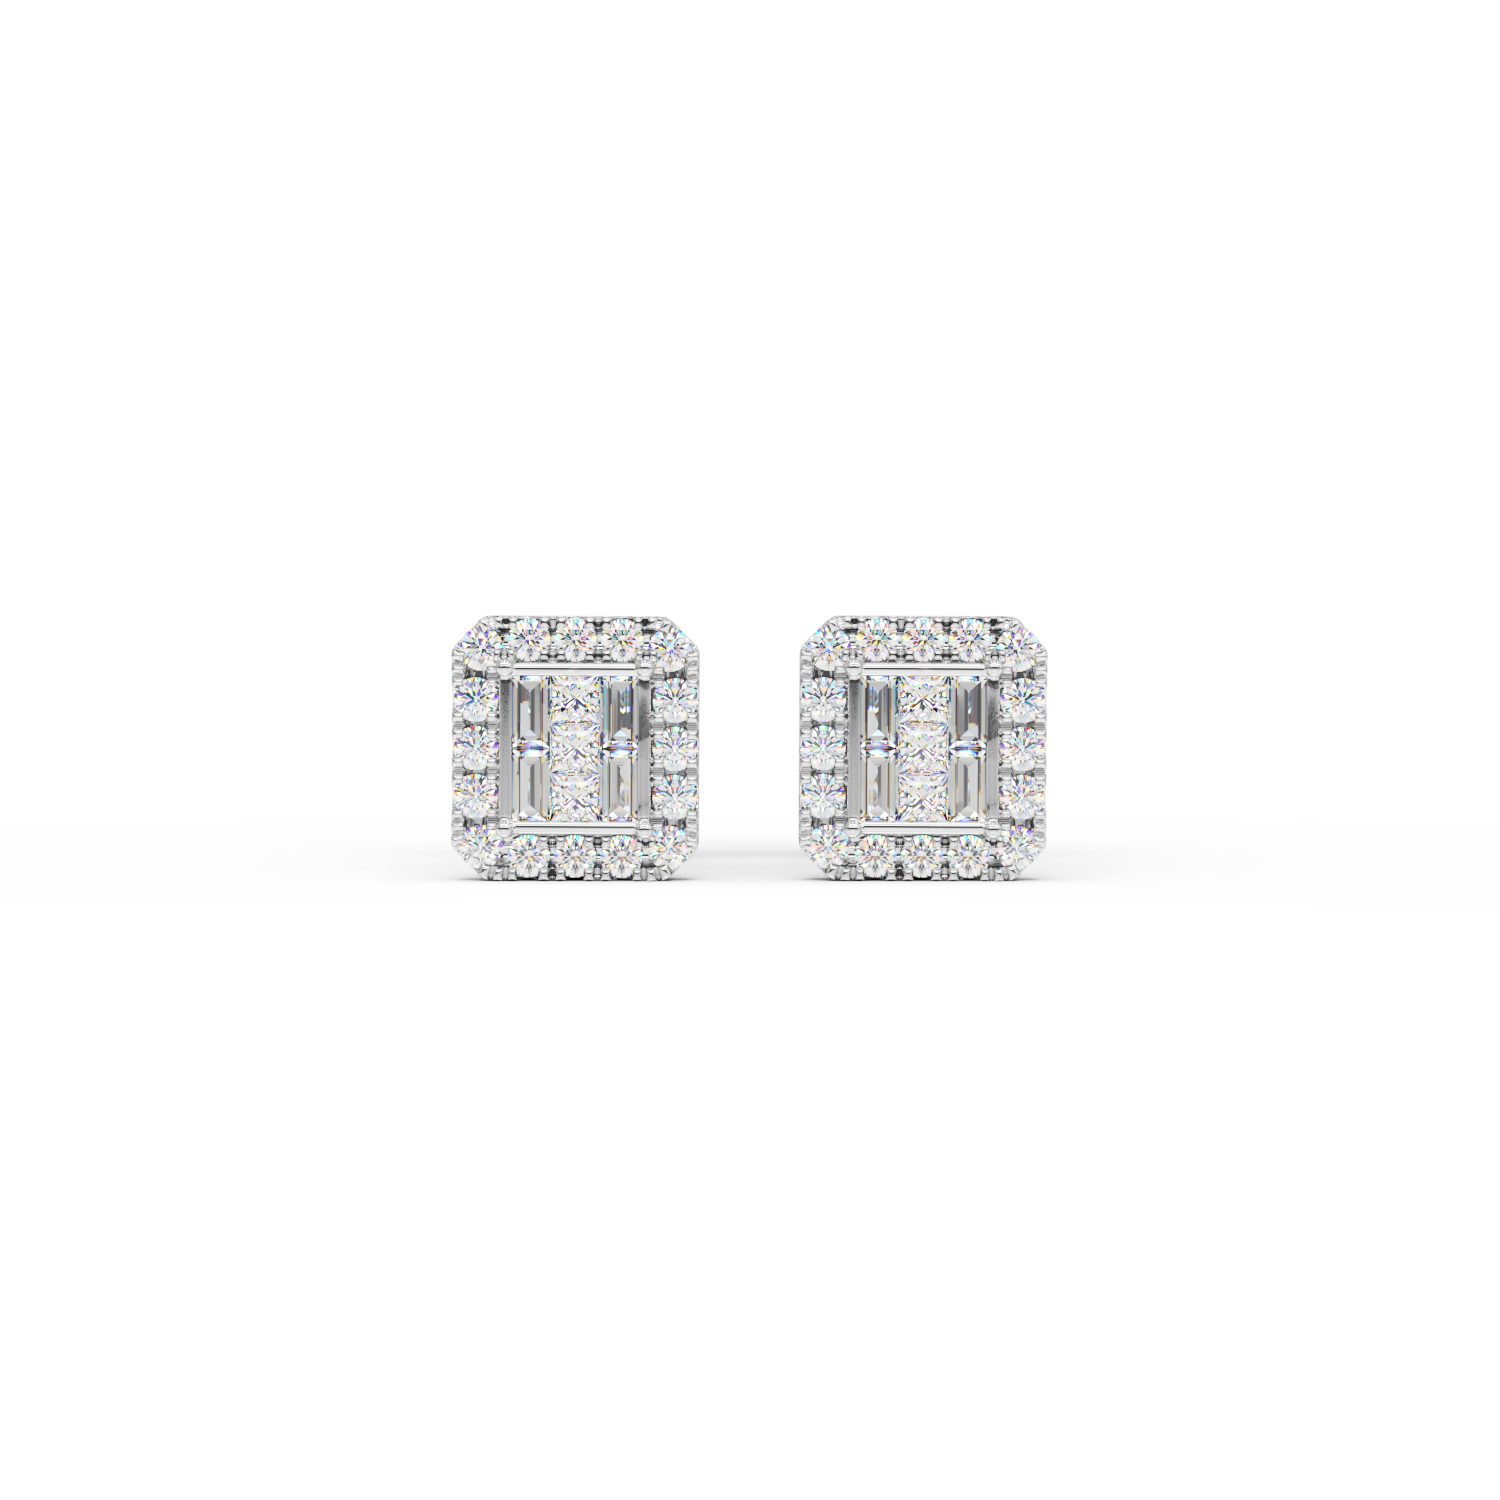 18K white gold earrings with 0.59ct diamonds